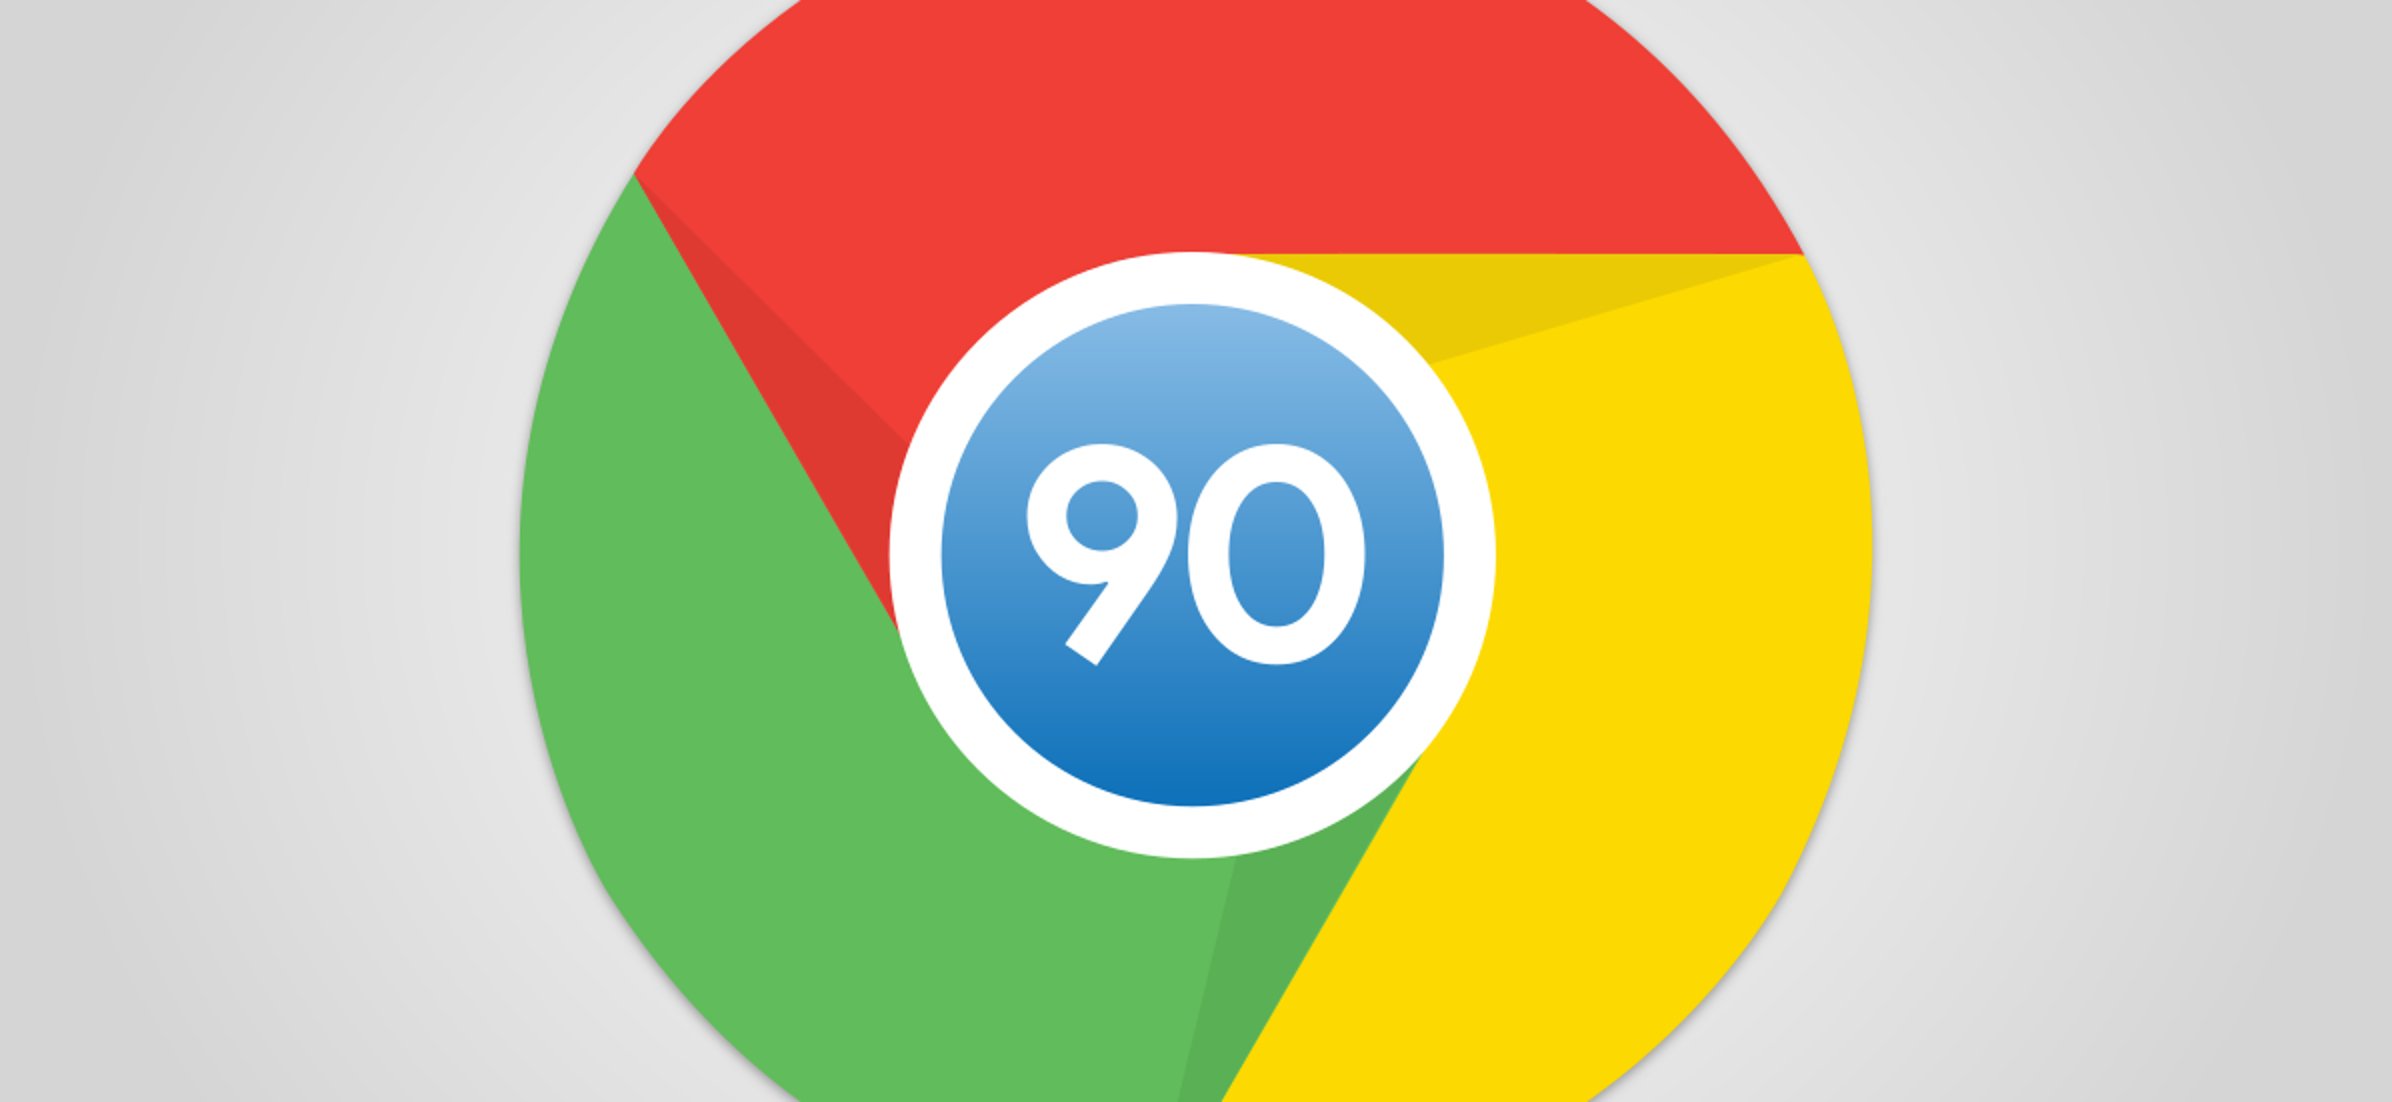 Chrome 90 security feature